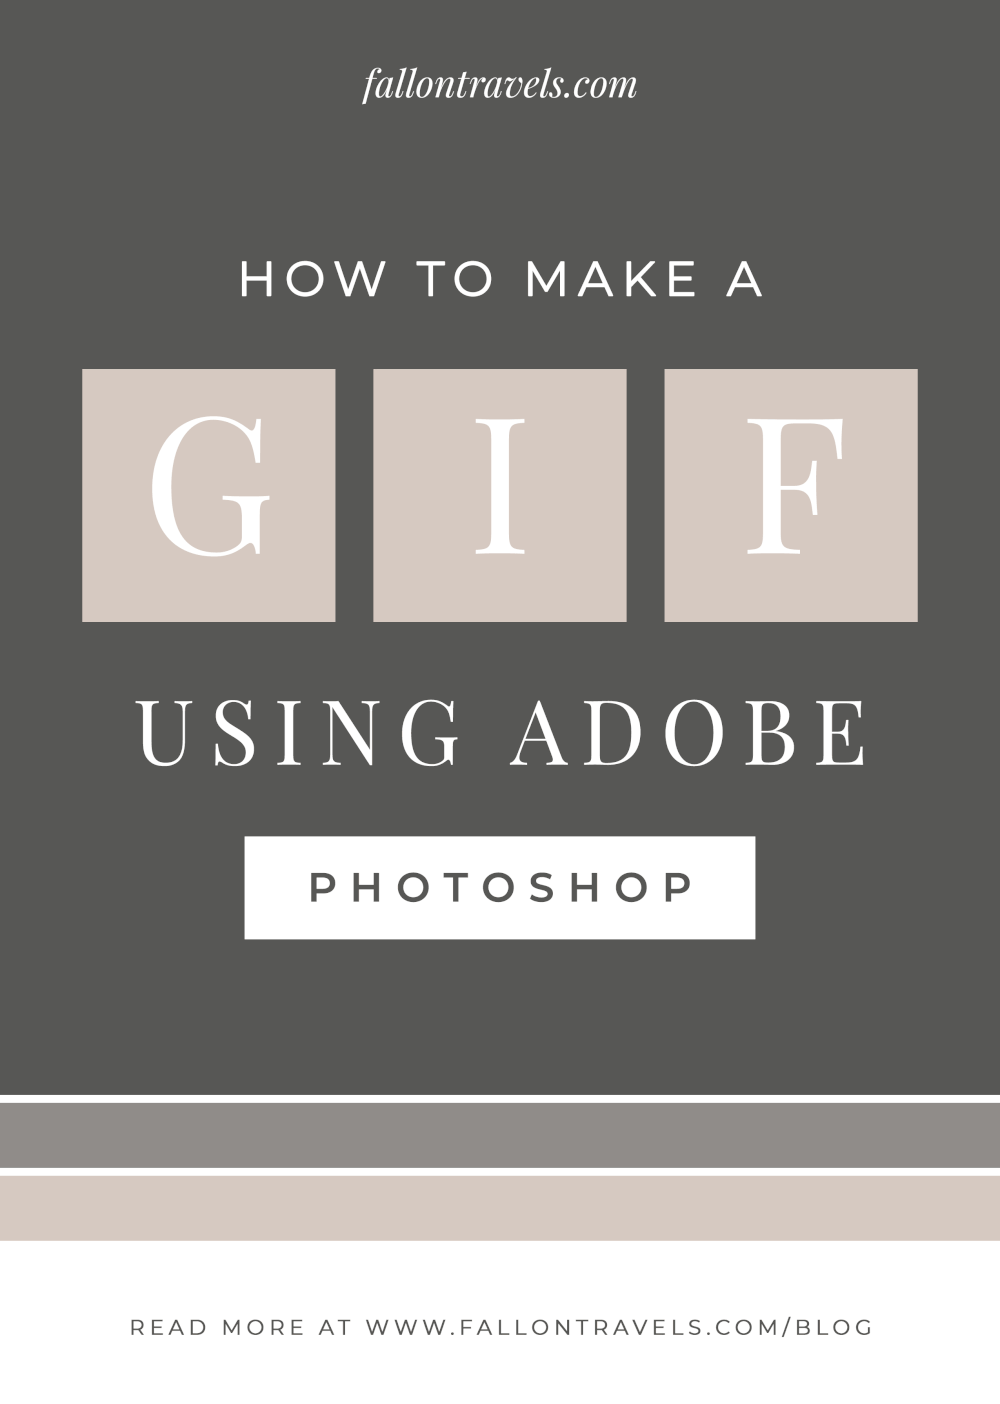 How To Make A Gif In Photoshop The Ultimate Guide Other Alternatives To Photoshop Fallon Travels